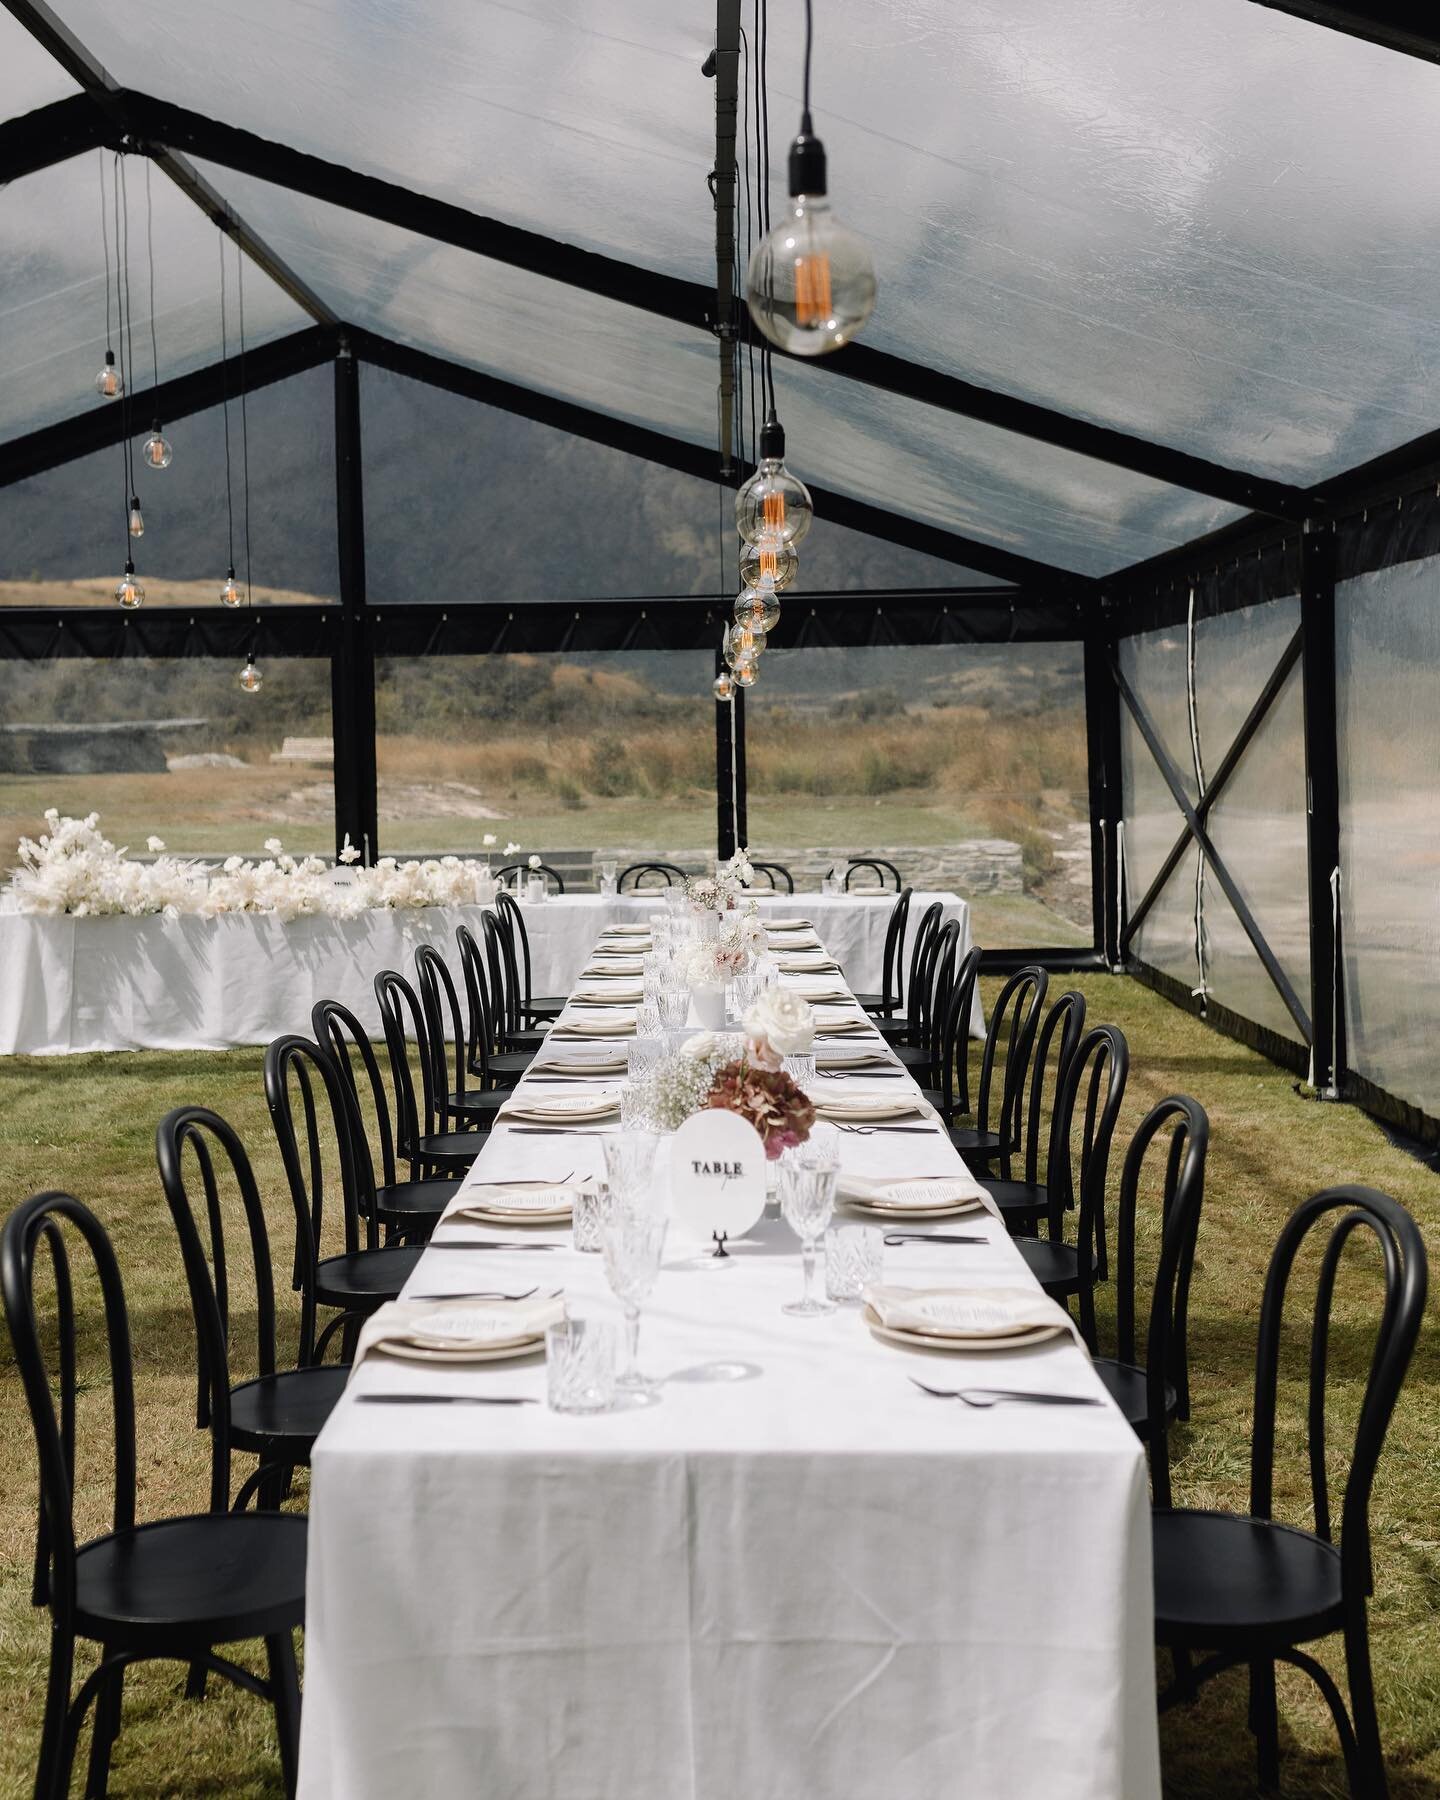 We have said it once, and we will say it again (and again!) that @onefinedayweddings really know how to bring our Alps Edition Marquee to life 🖤 ✨🪩

Marquee &amp; Tables | @yougather_events 
Florals | @allbunchedup_ 
Chairs &amp; Styling | @onefine